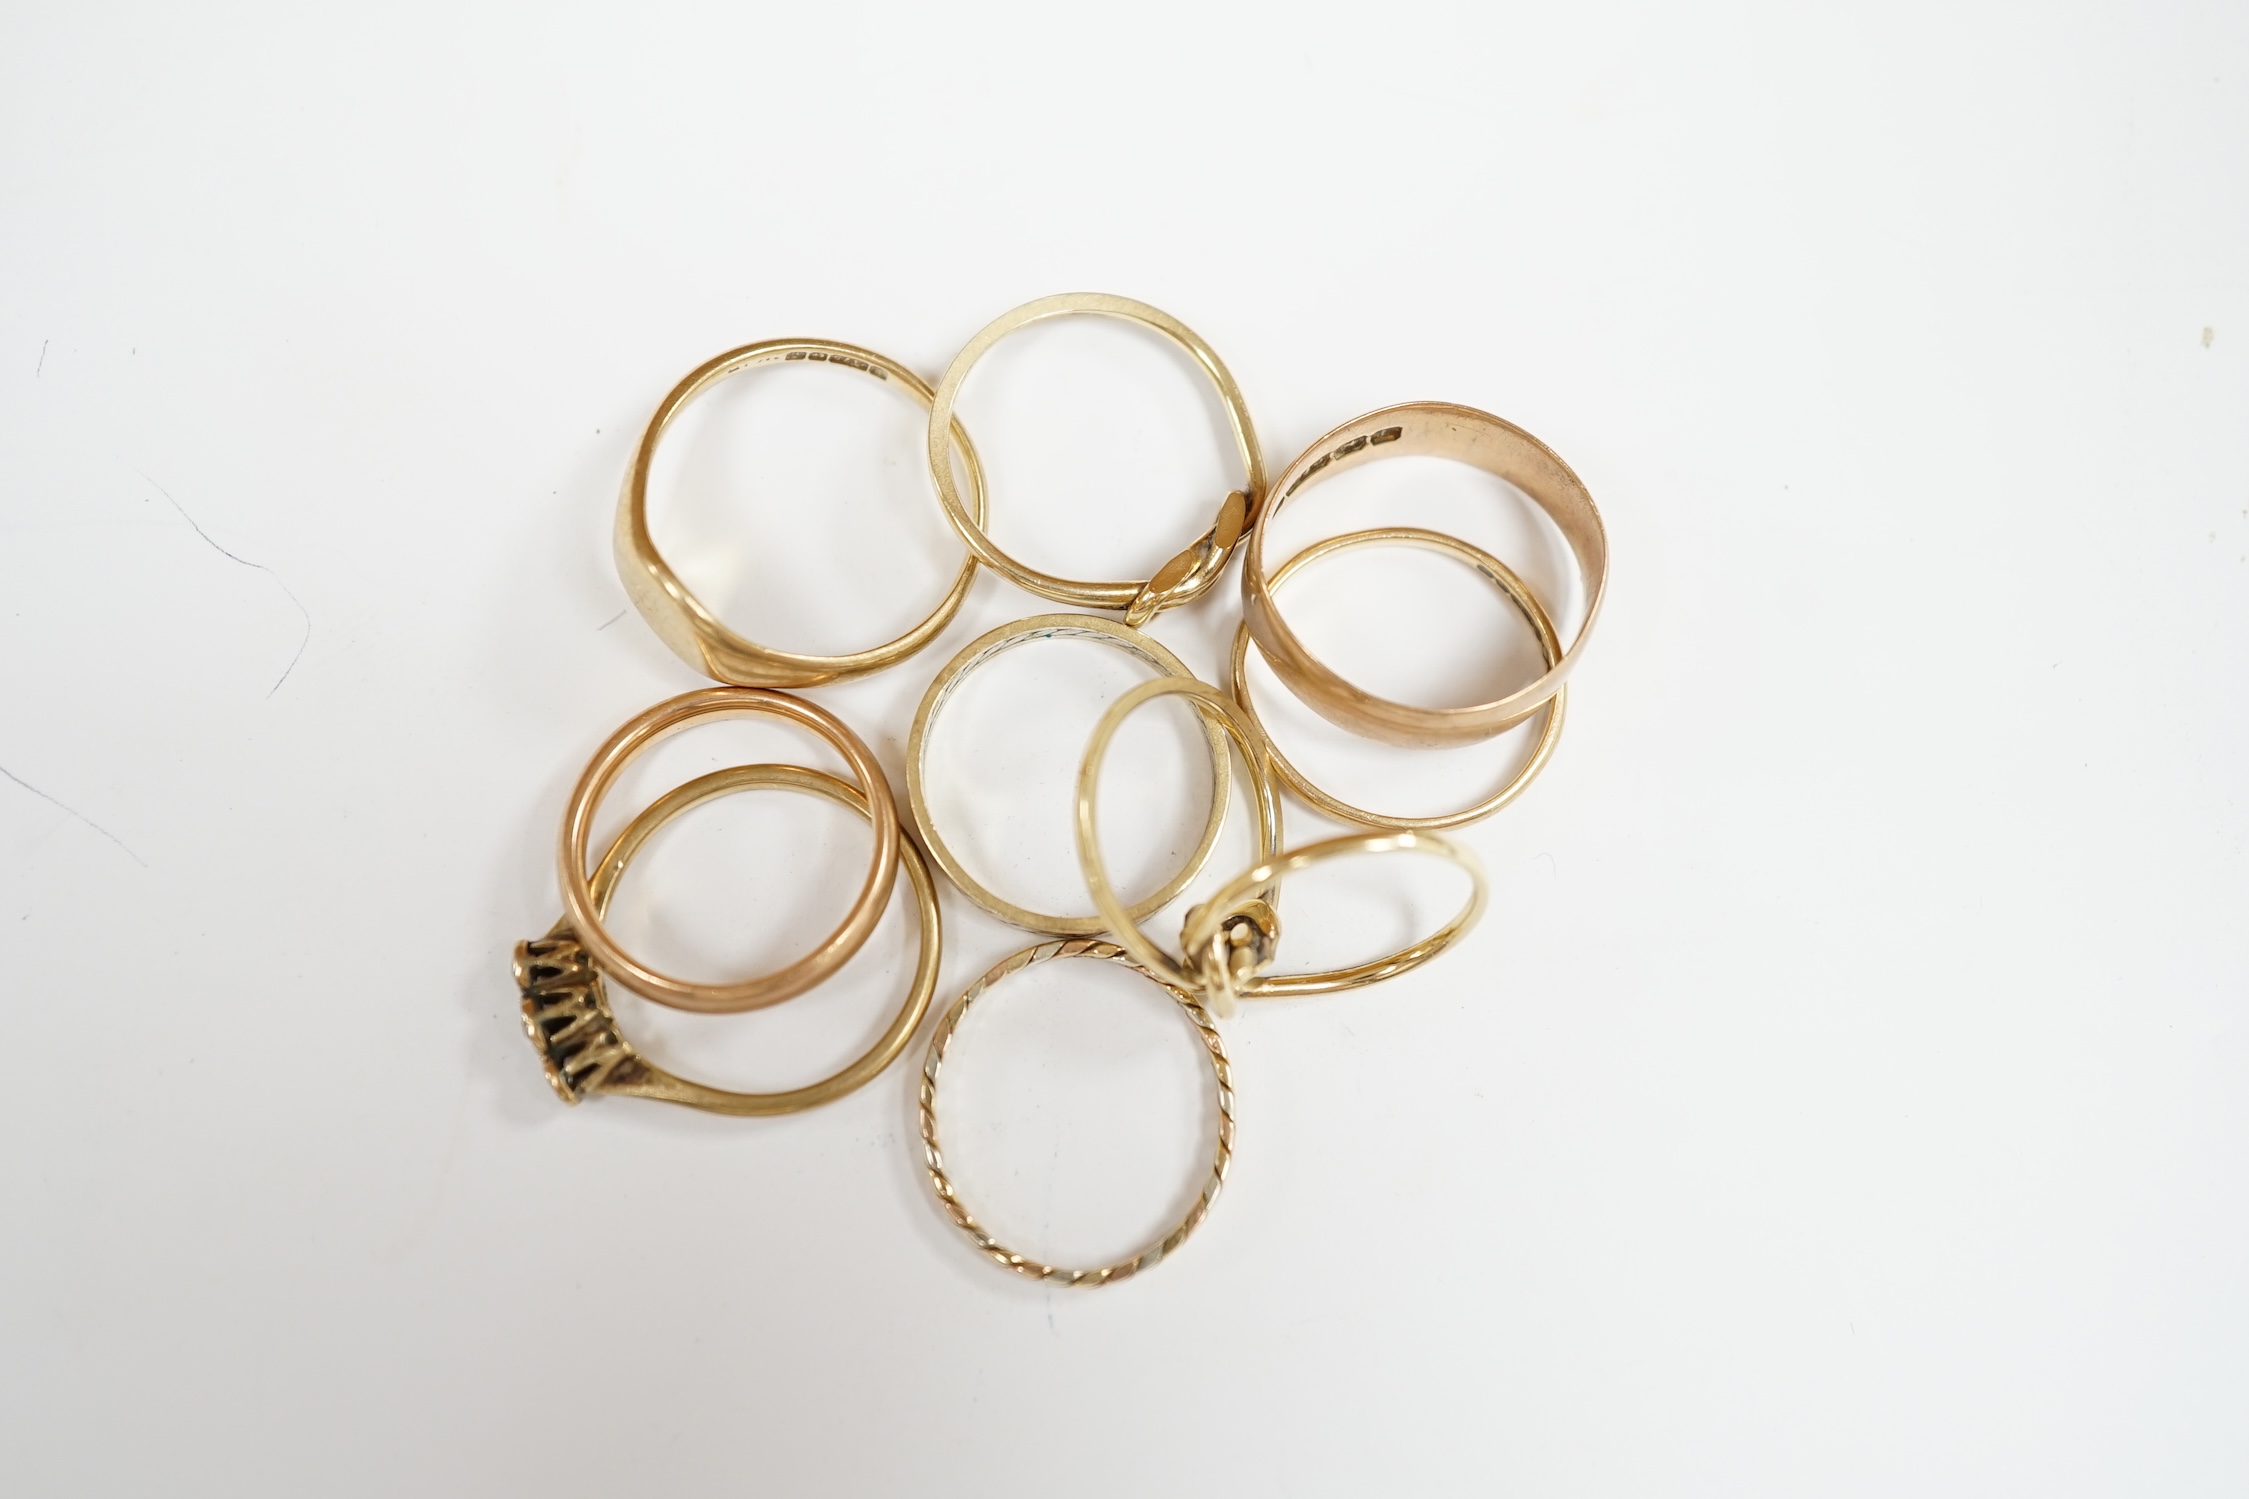 Six assorted 9ct gold bands, including two colour, together with a 9ct gold signet ring, a double band 9ct ring and a 9ct and three stone gem set ring, gross weight 18.8 grams. Condition - poor to fair